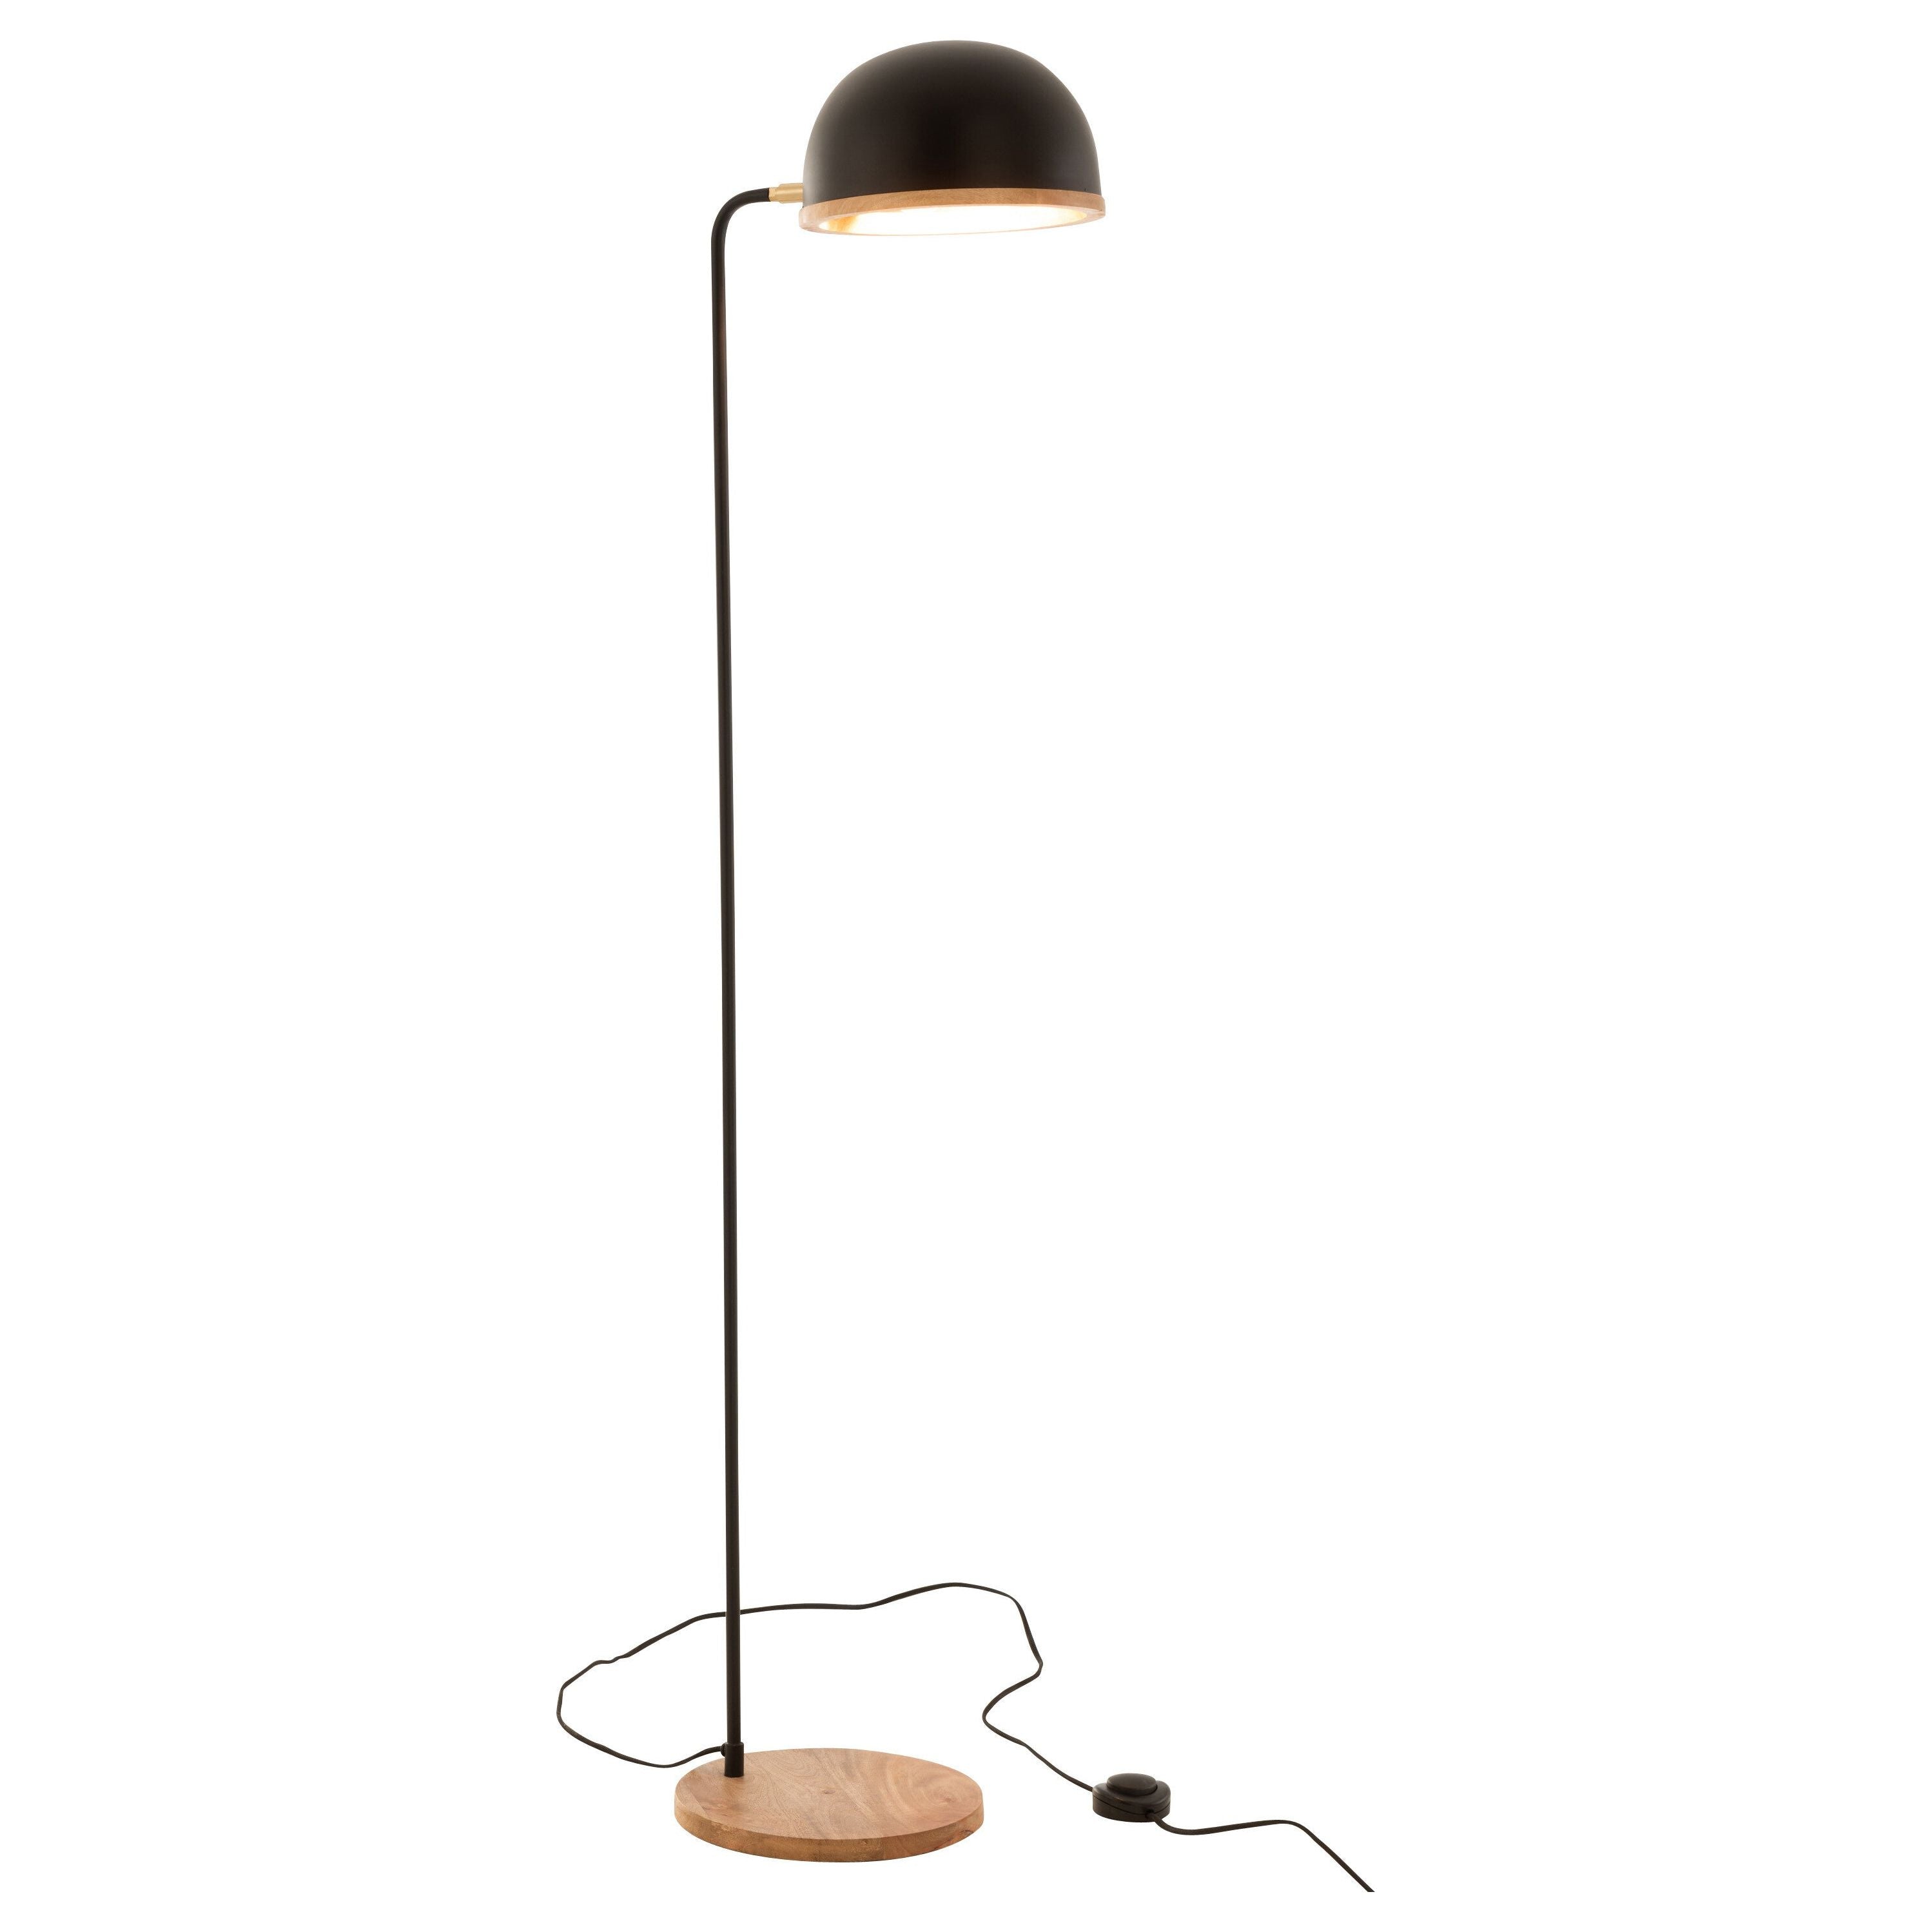 Standing Lamp Evy Iron/wood Black/natural